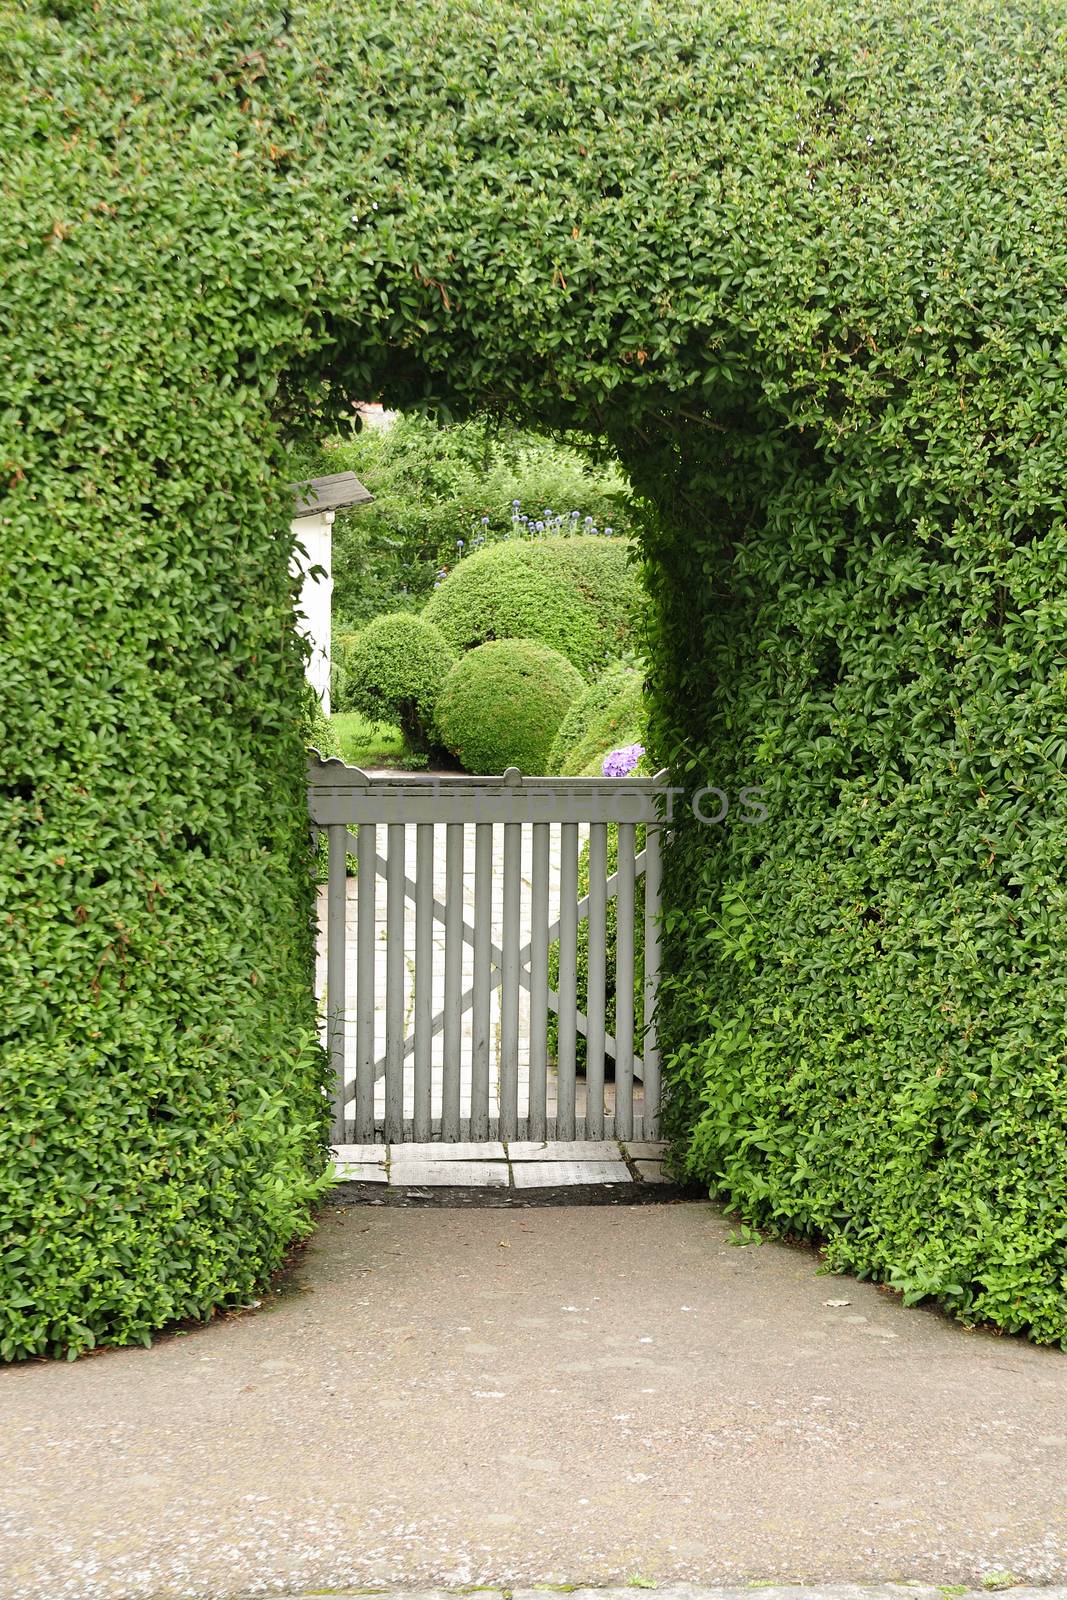 Hedge Arch with Gate by a40757